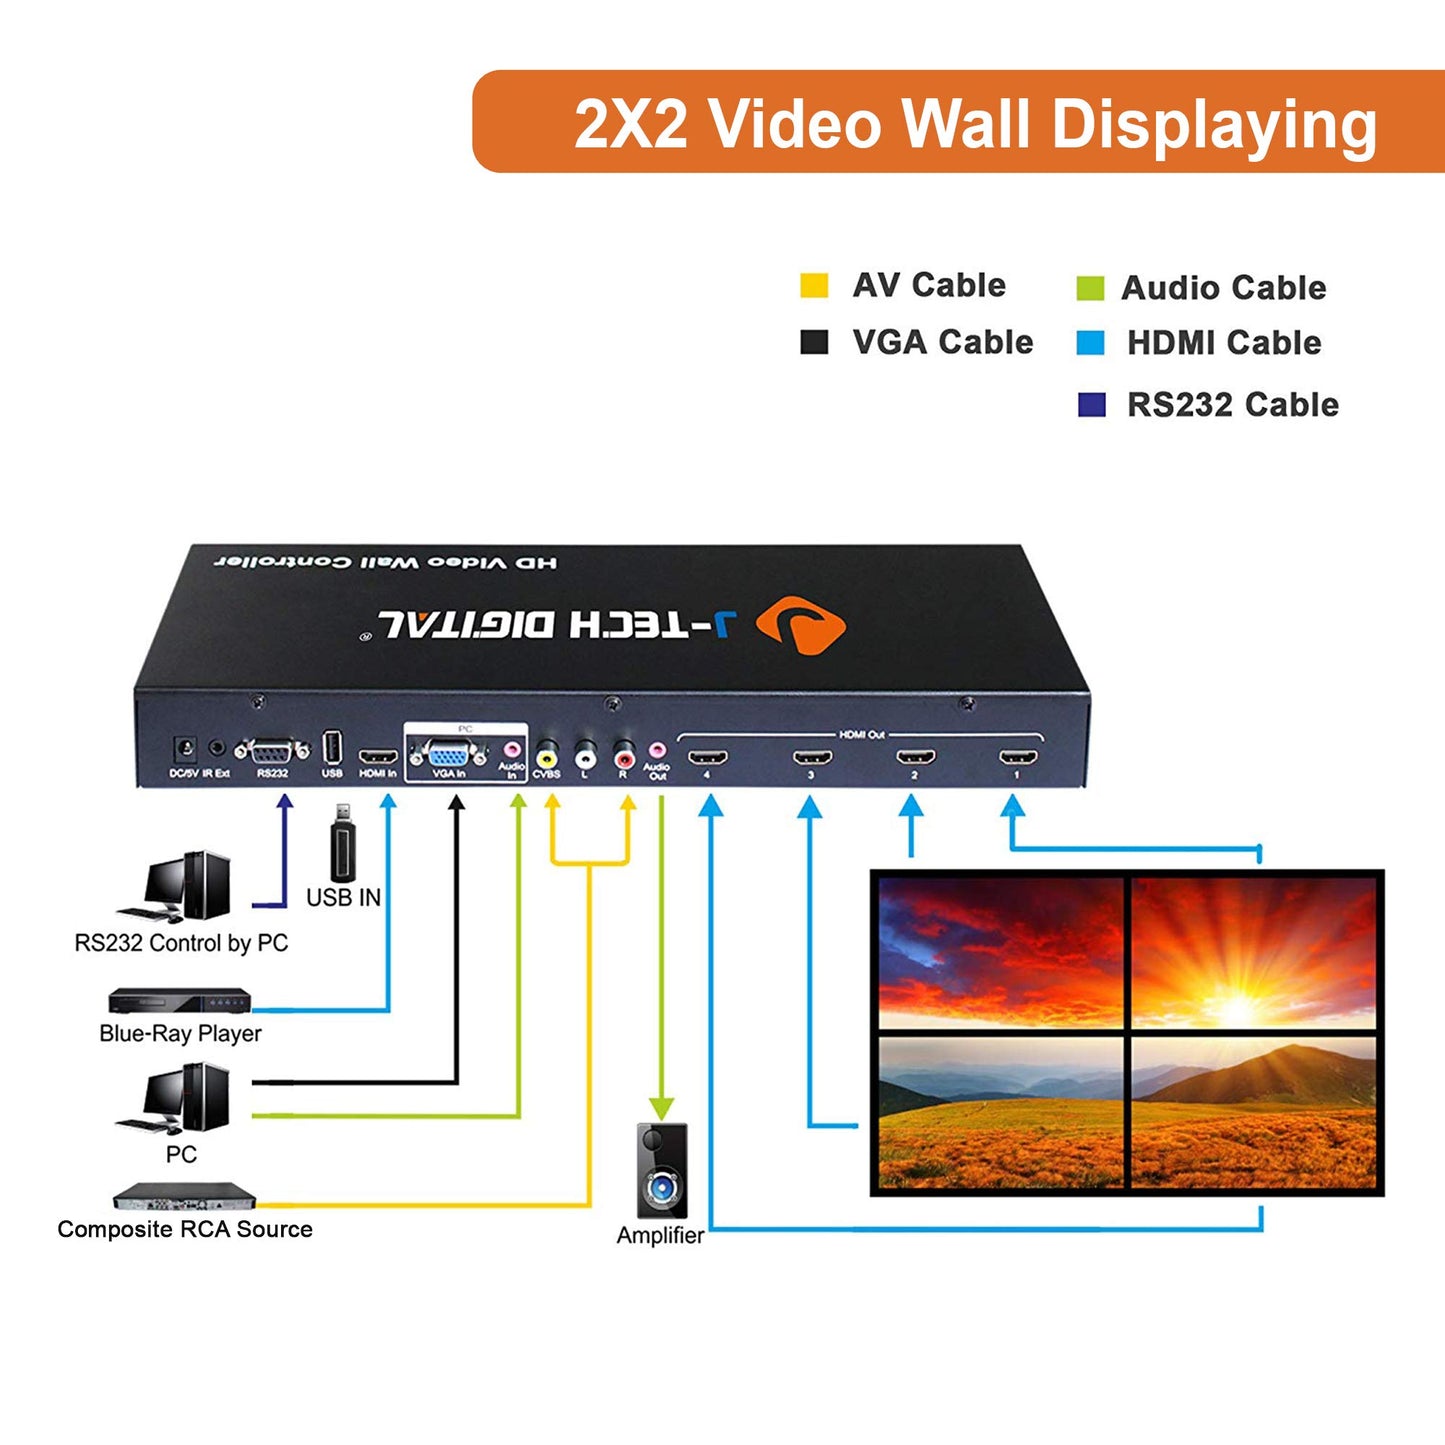 J-Tech Digital Video Wall Controller 3X3 2X2 1X4 3X1 Multi-Channel inputs HDMI VGA AV USB for LCD LED Video Wall Display with Cascading Function Control4 Driver Available [JTECH-VW02]